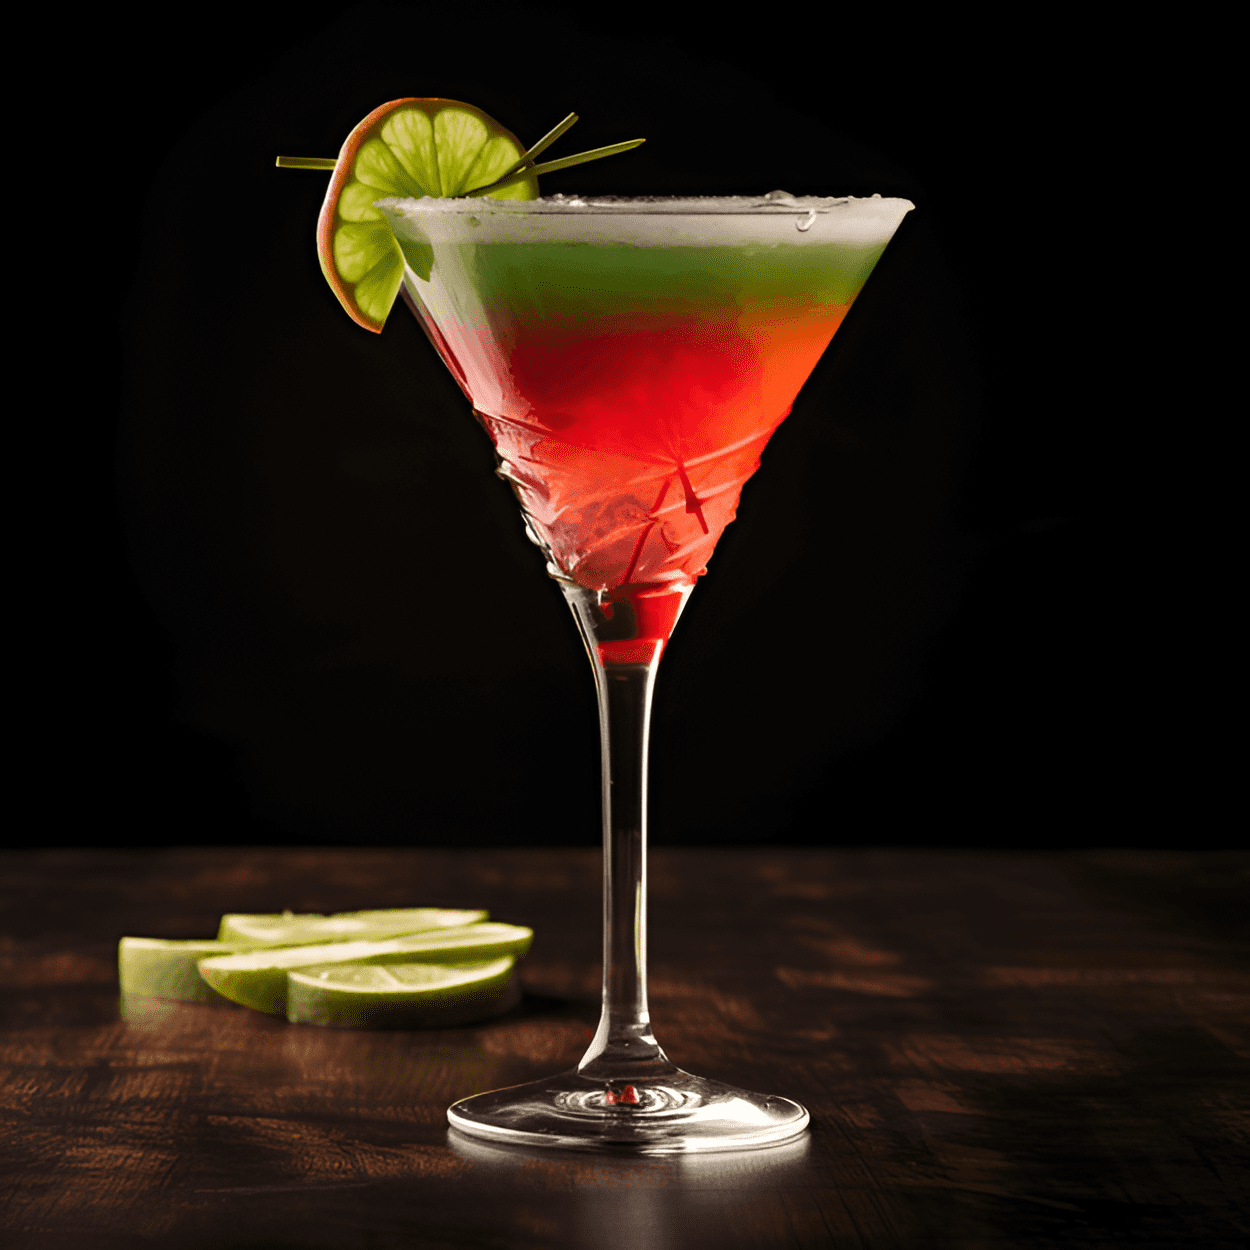 Crab Cocktail Recipe - The Crab Cocktail has a unique balance of sweet and sour. The tartness of the lime juice is perfectly balanced by the sweetness of the apple juice and grenadine, while the vodka adds a smooth, strong kick.